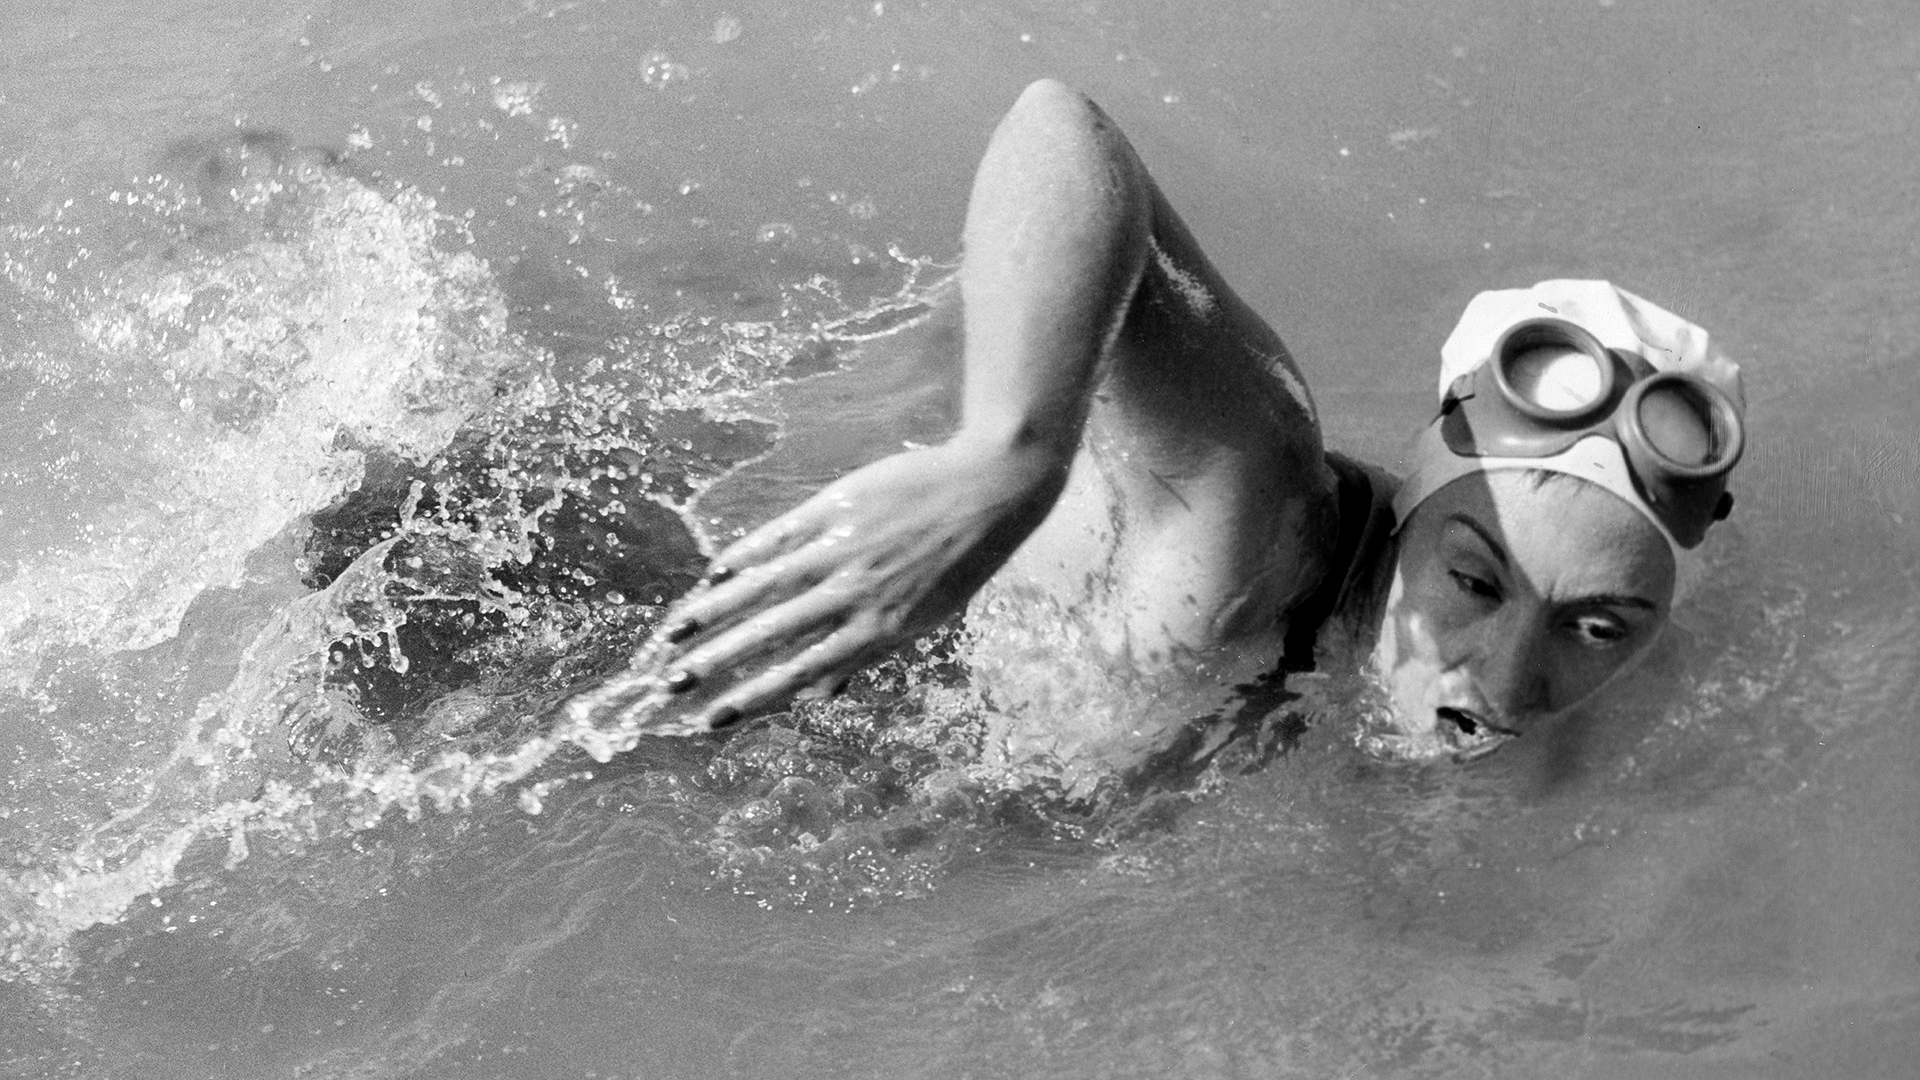 September 11, 1951: Florence Chadwick Became First Woman to Swim Round-Trip Across the English Channel